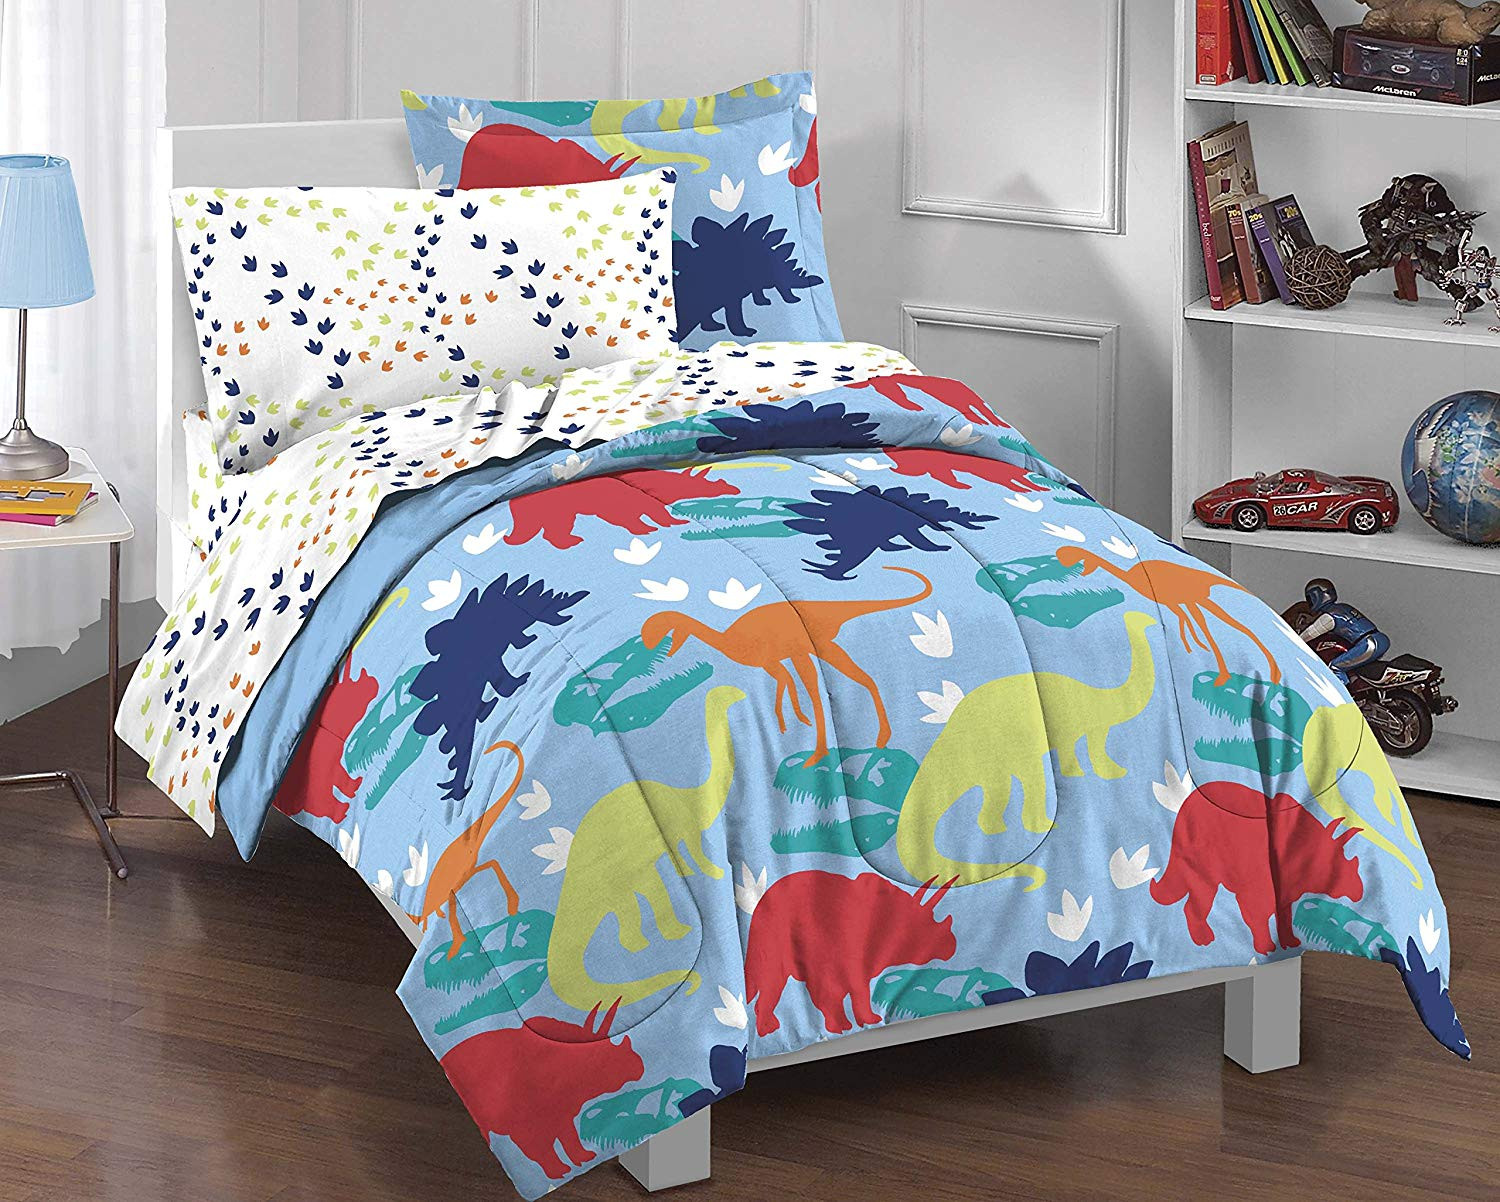 Boy Twin Bedroom Set
 Best Beautiful Boys Bedding Sets – Ease Bedding with Style